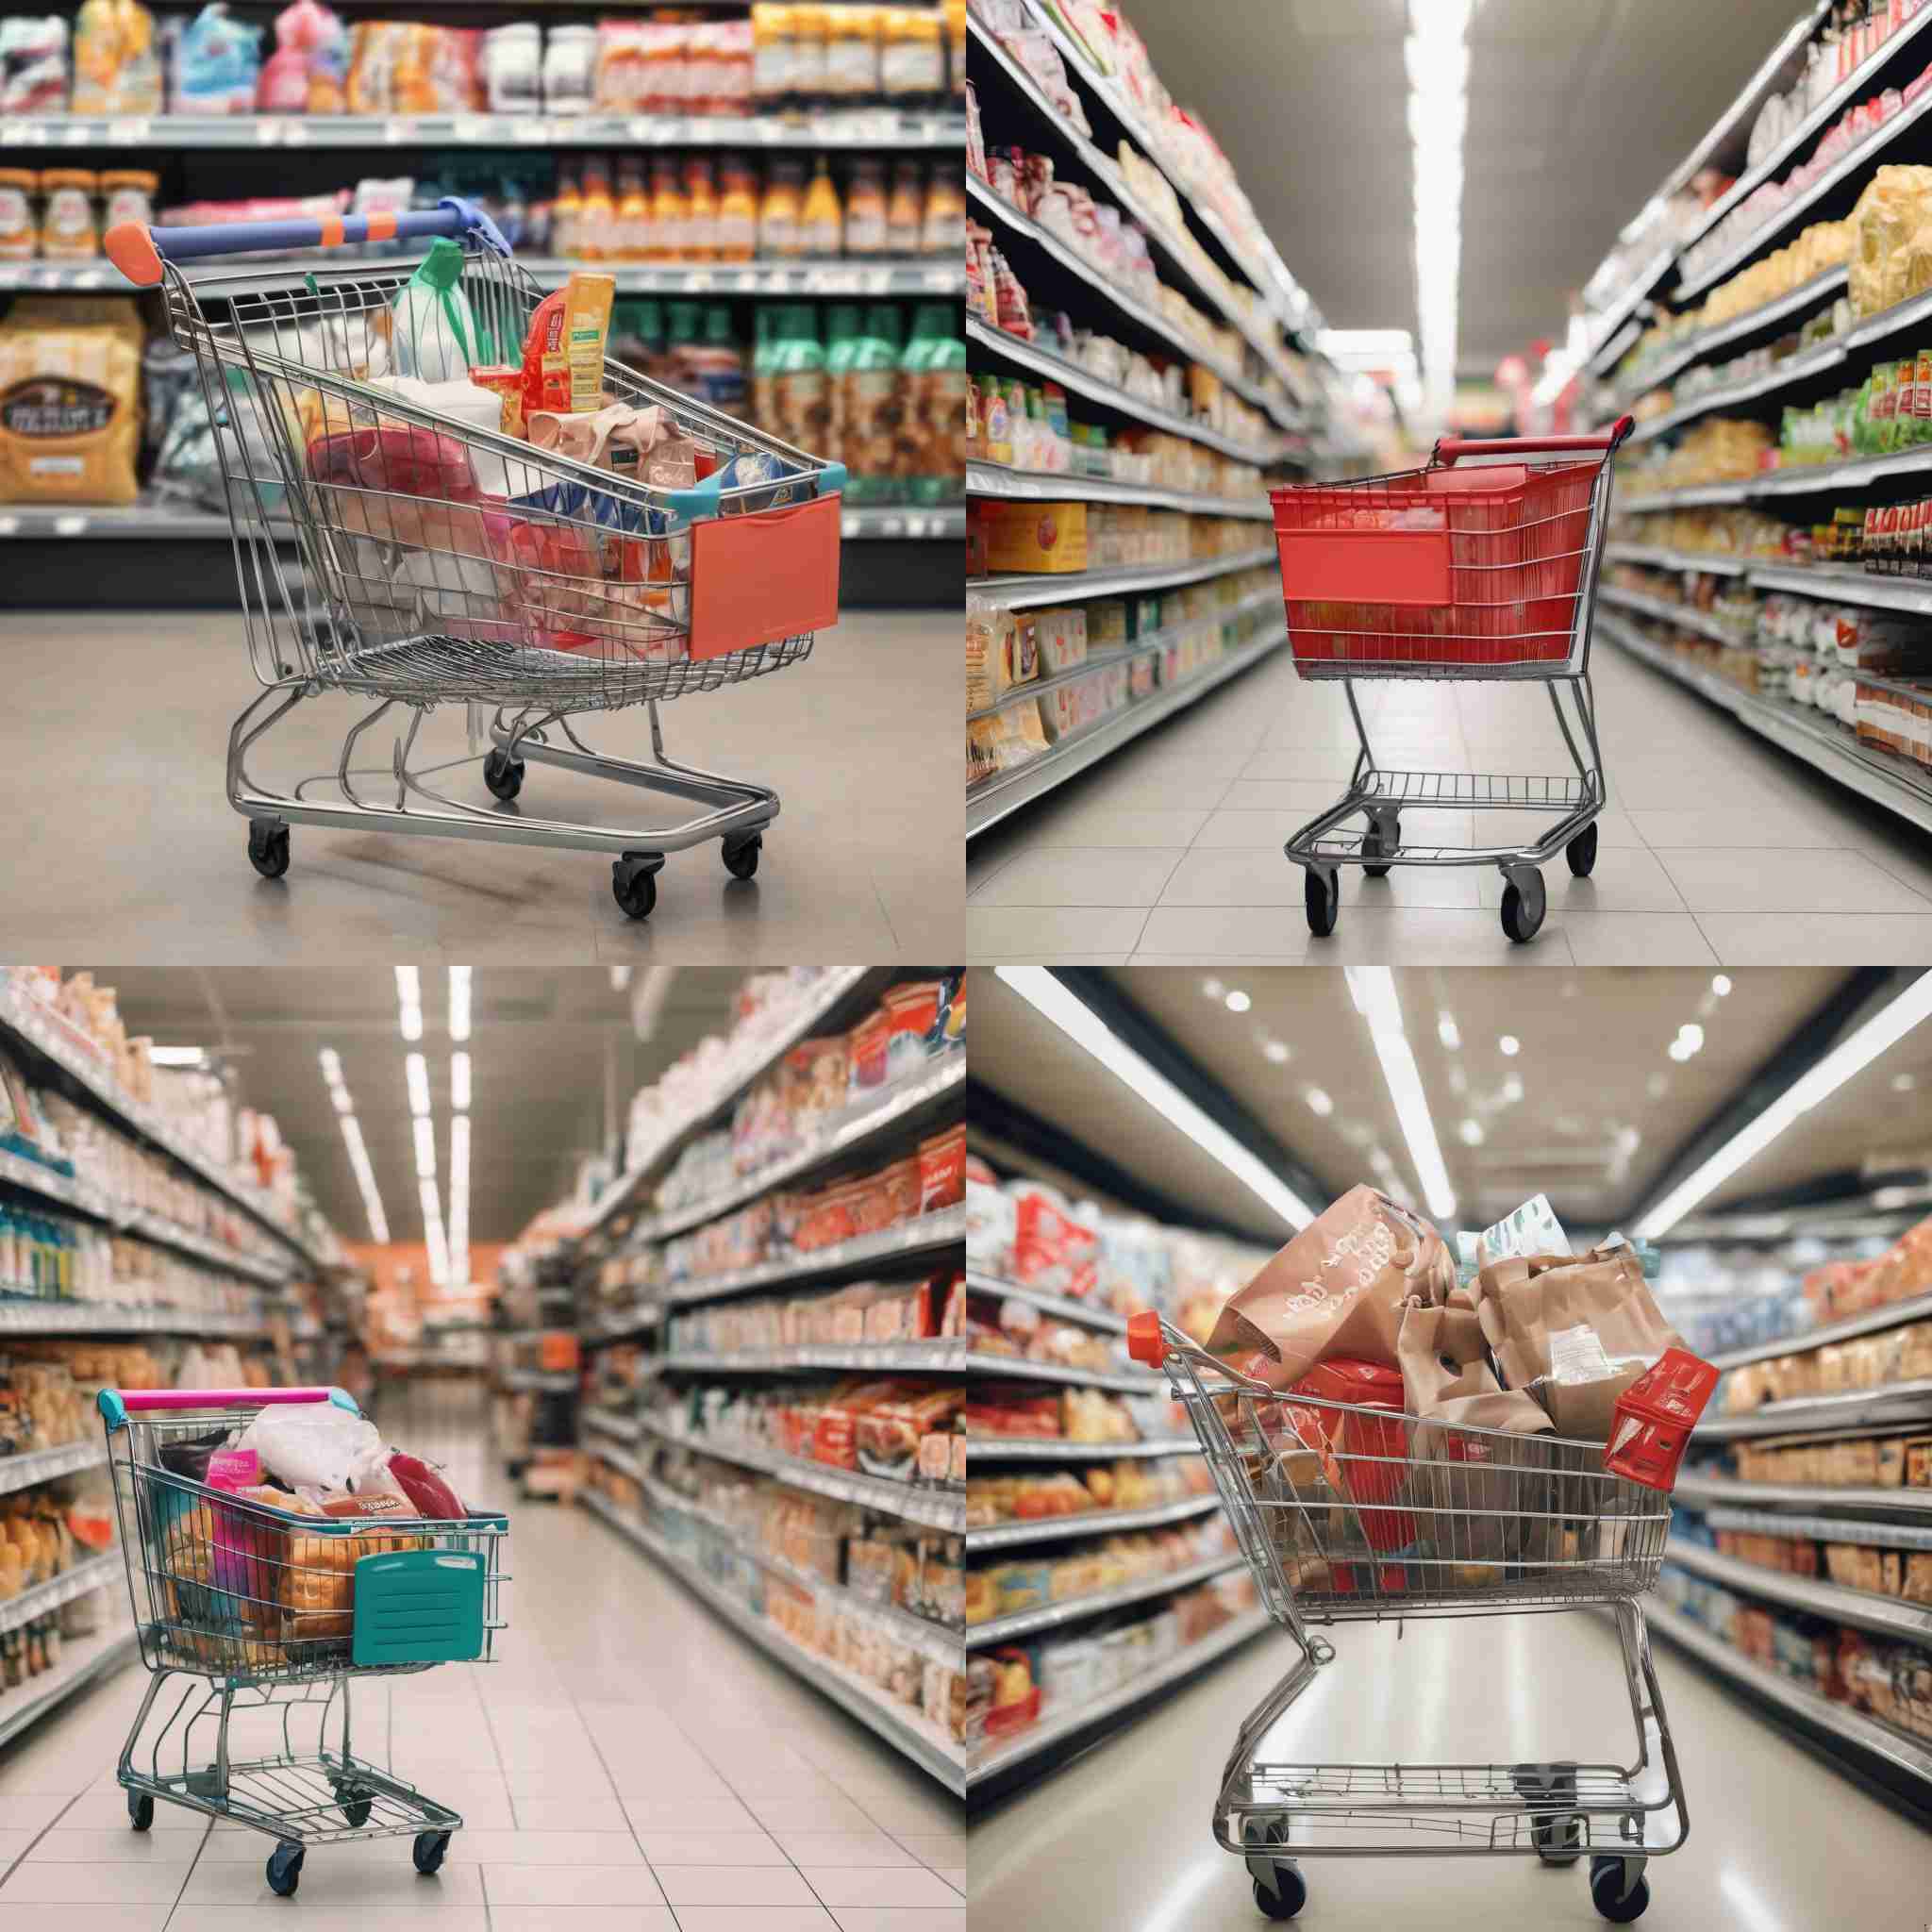 A shopper's cart before she buys anything